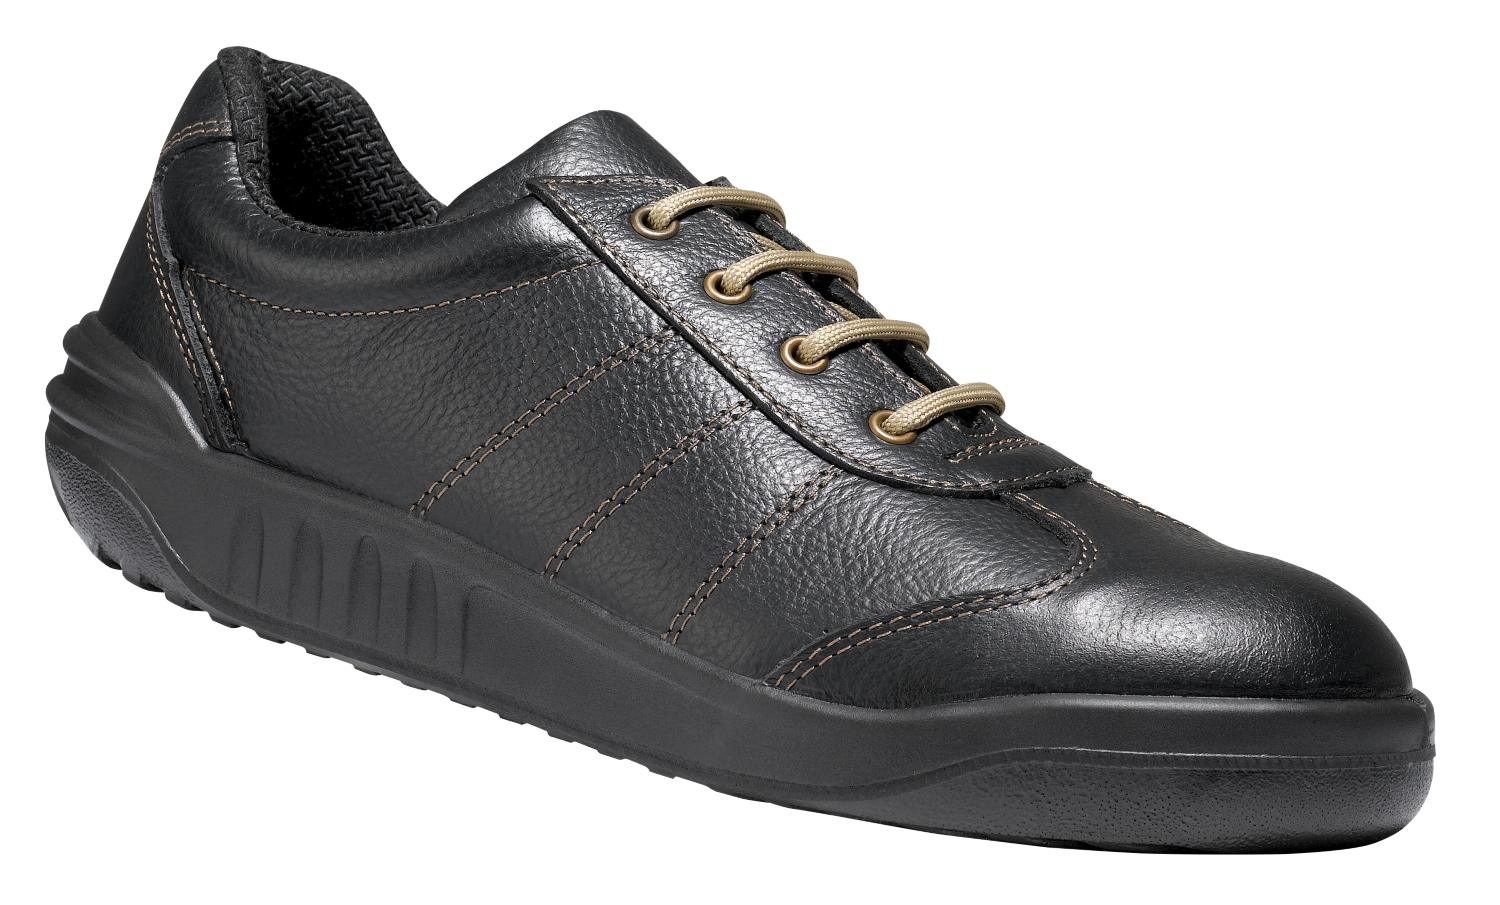 Chaussures basses Josio - S2 Parade 